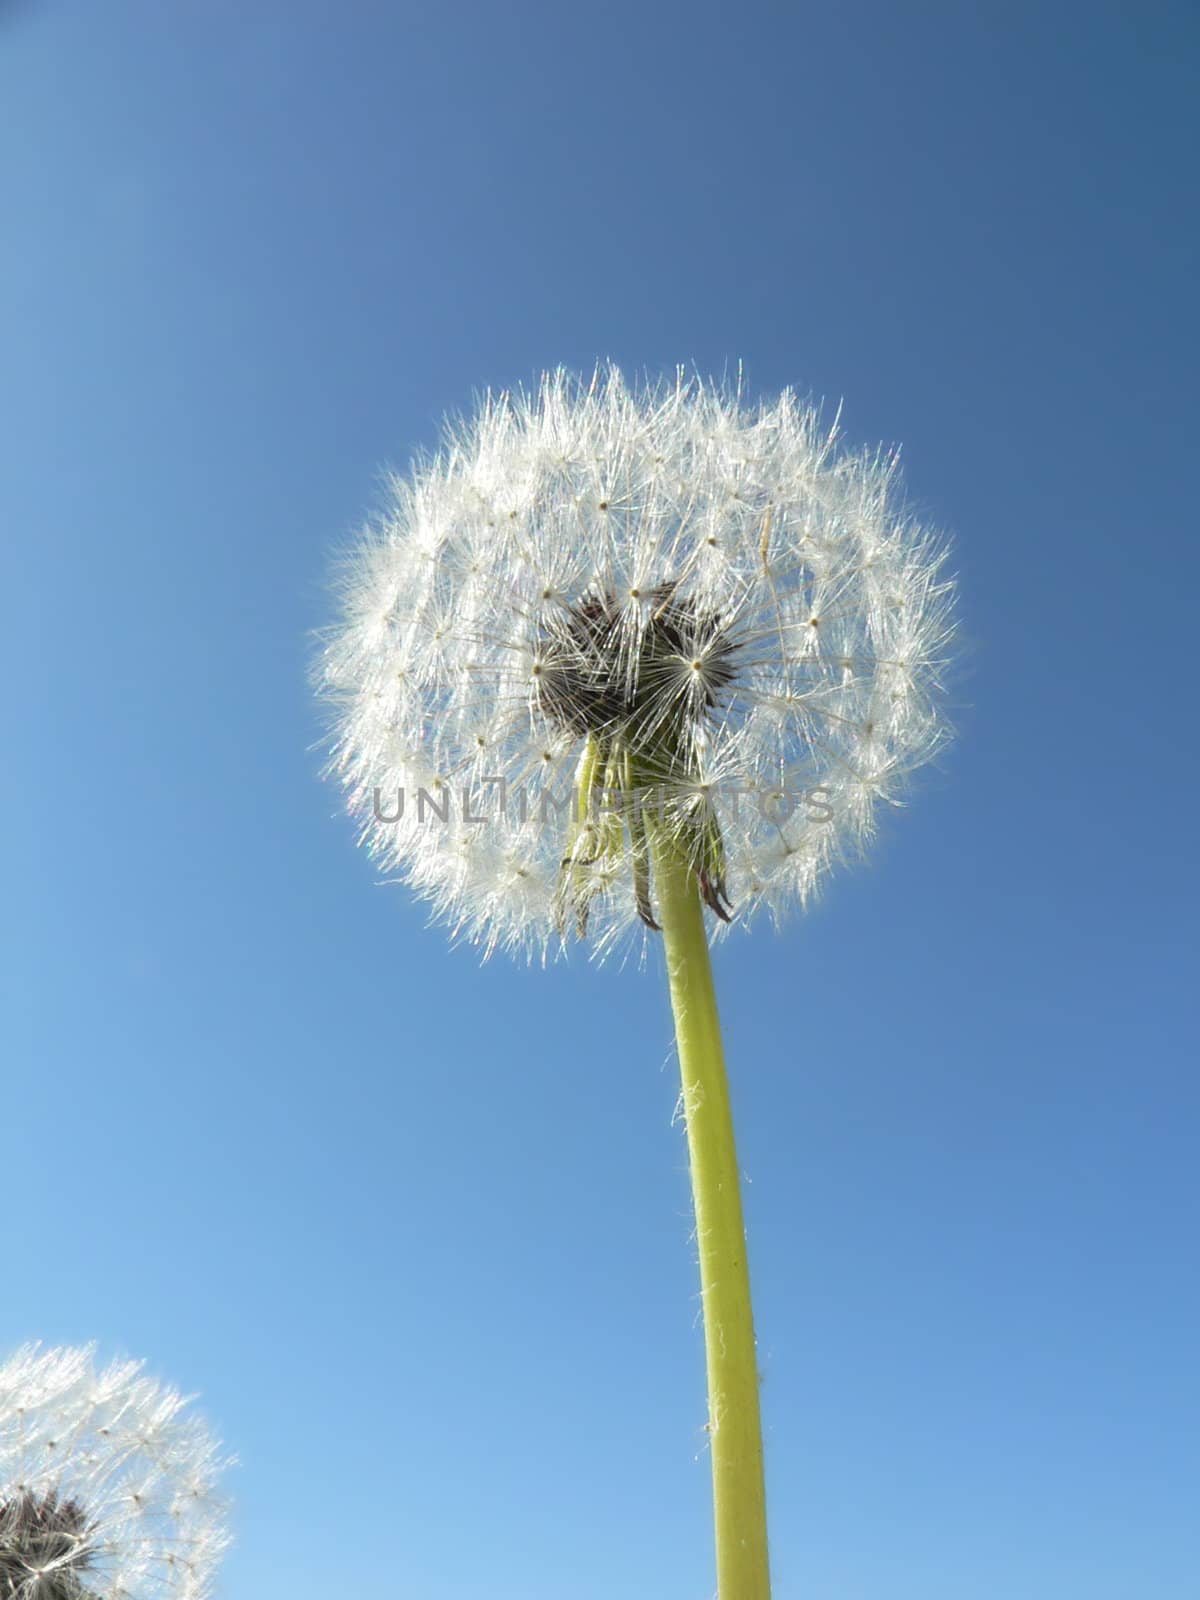 Two dandelions against a clear blue sky.